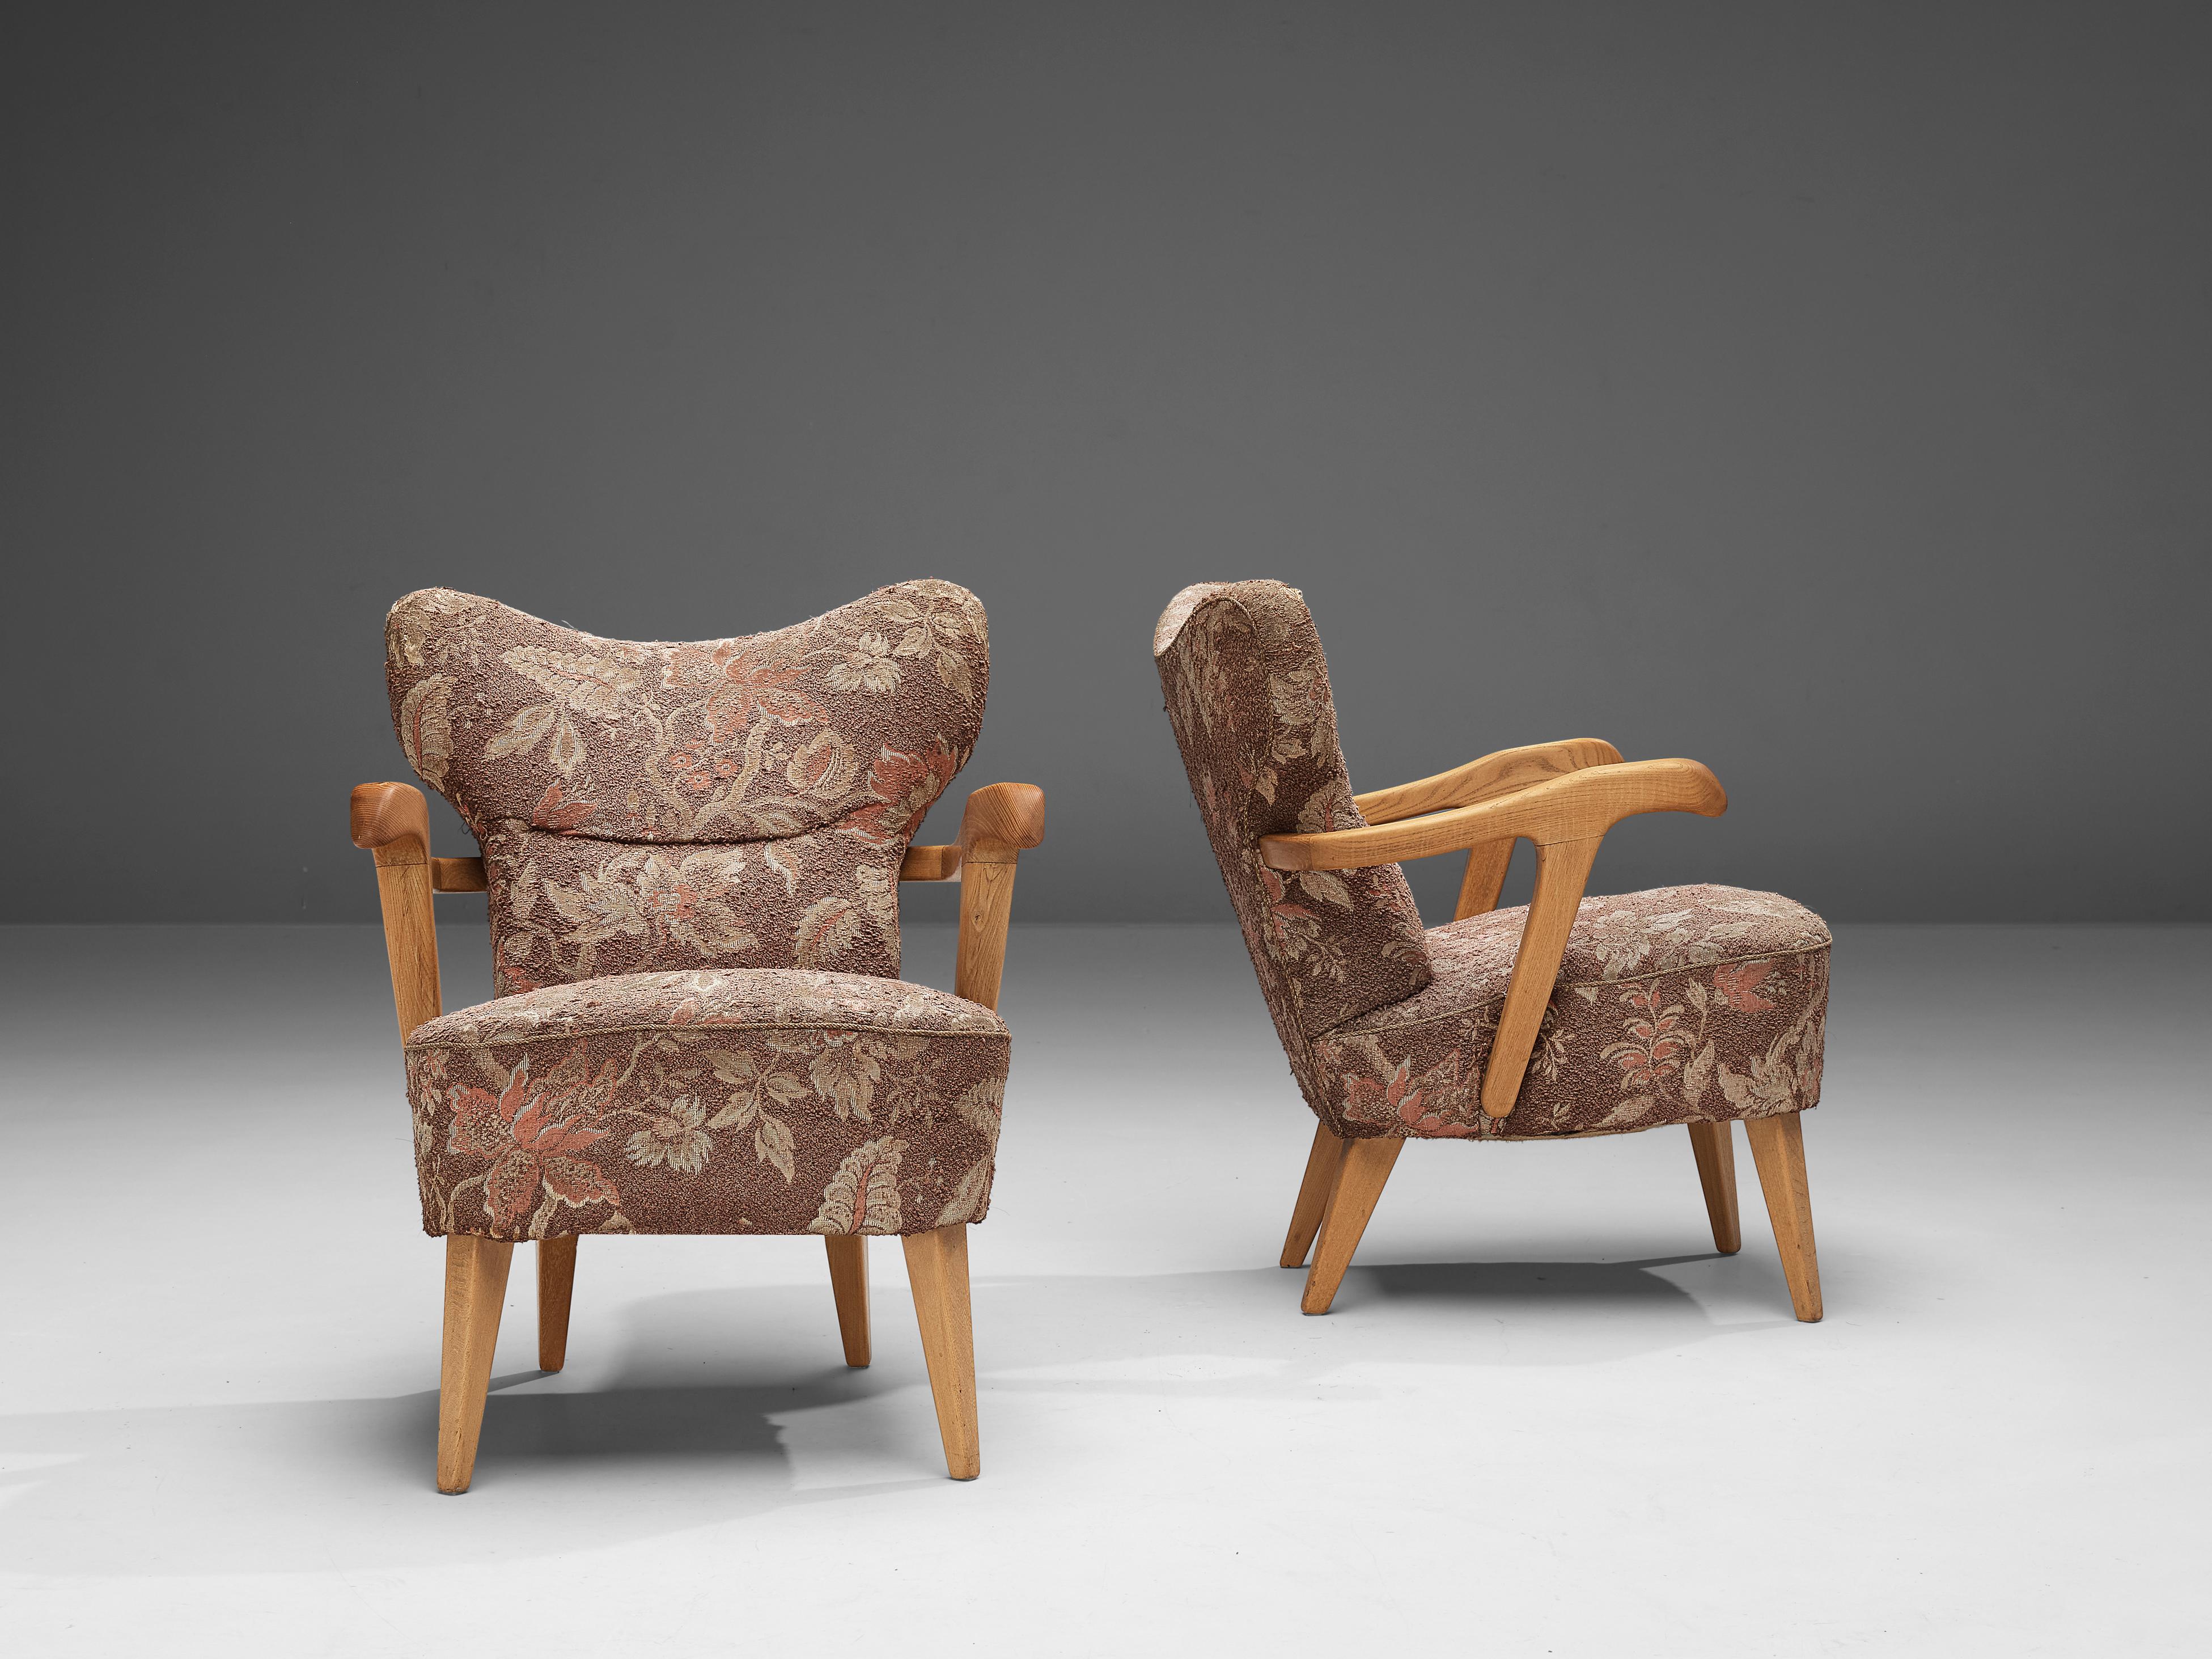 Pair of Sculptural Italian Lounge Chairs in Oak and Floral Upholstery 1